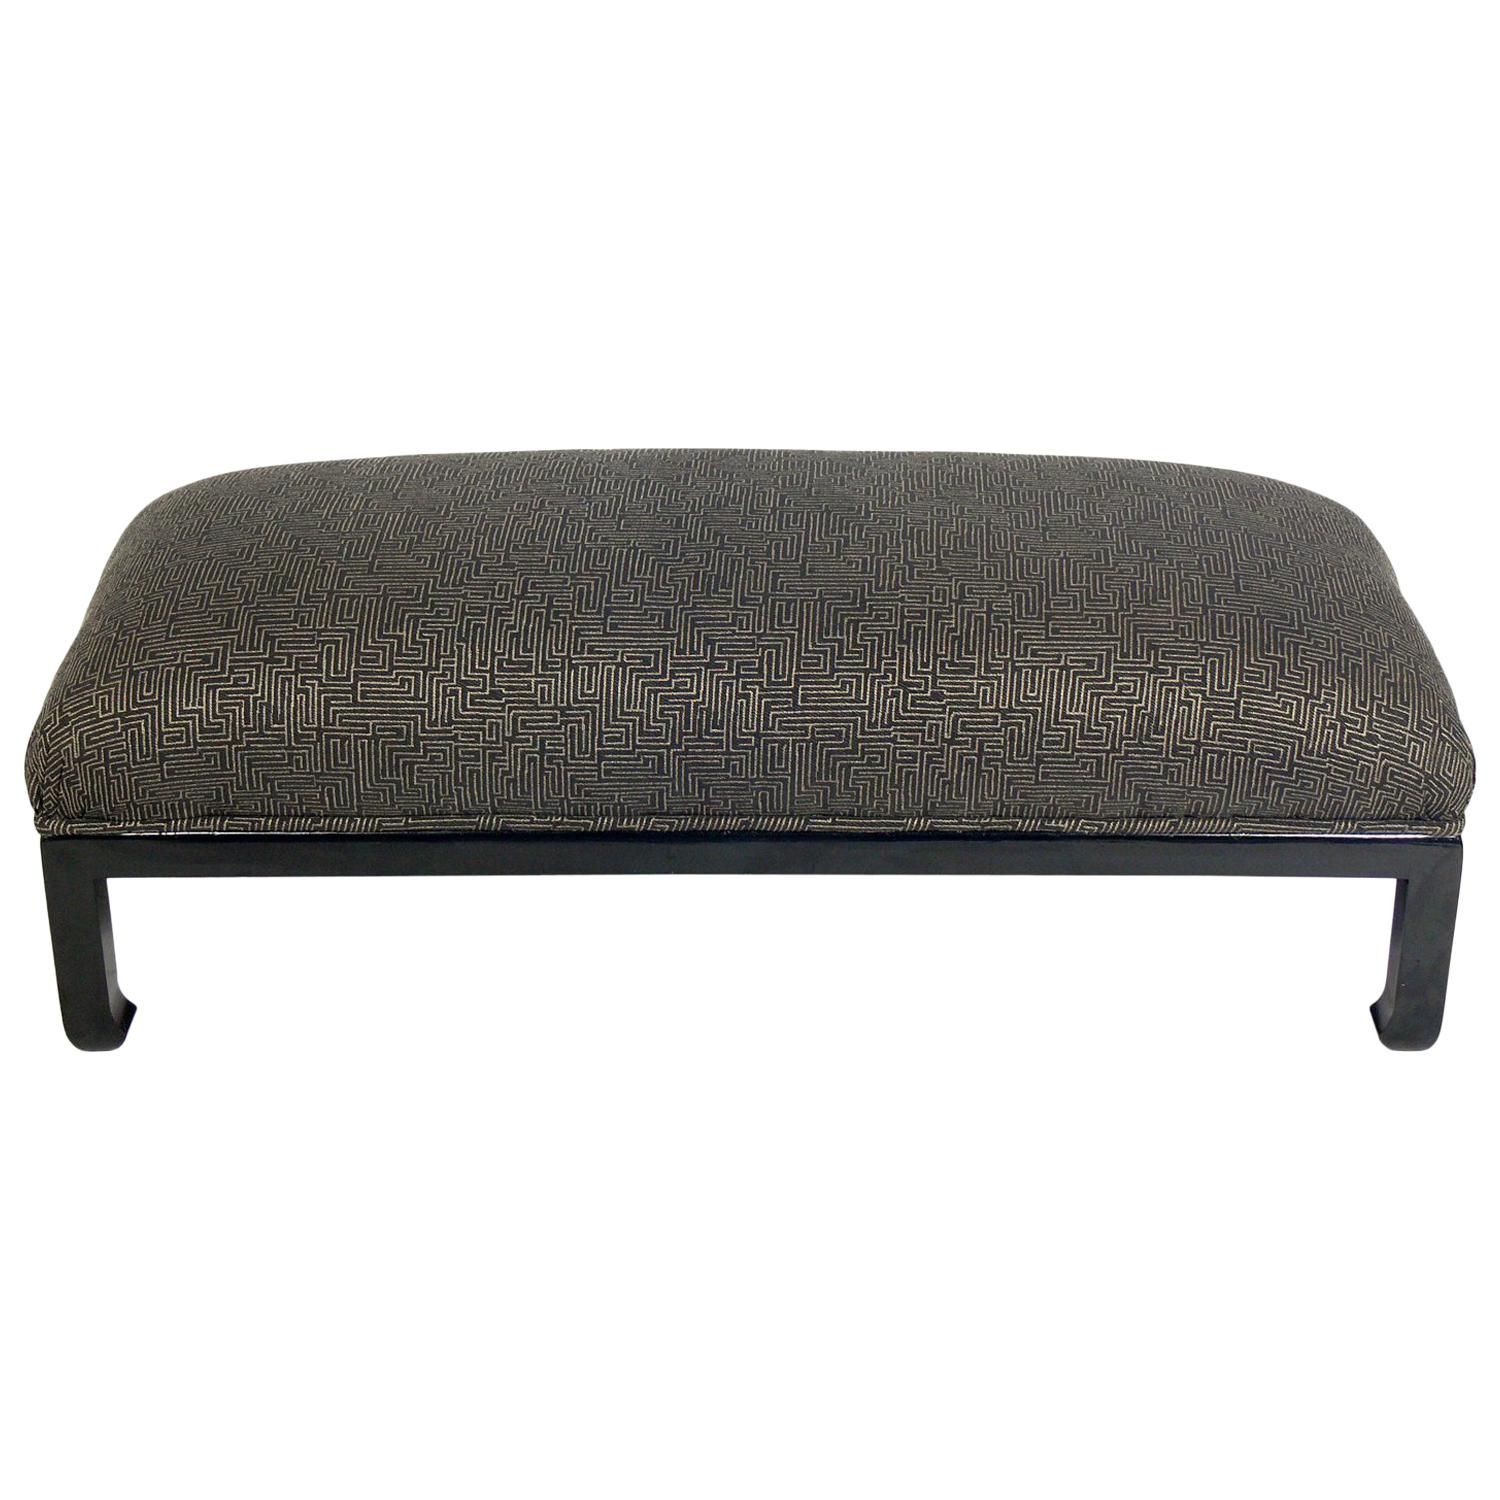 Low Slung Asian Inspired Midcentury Bench